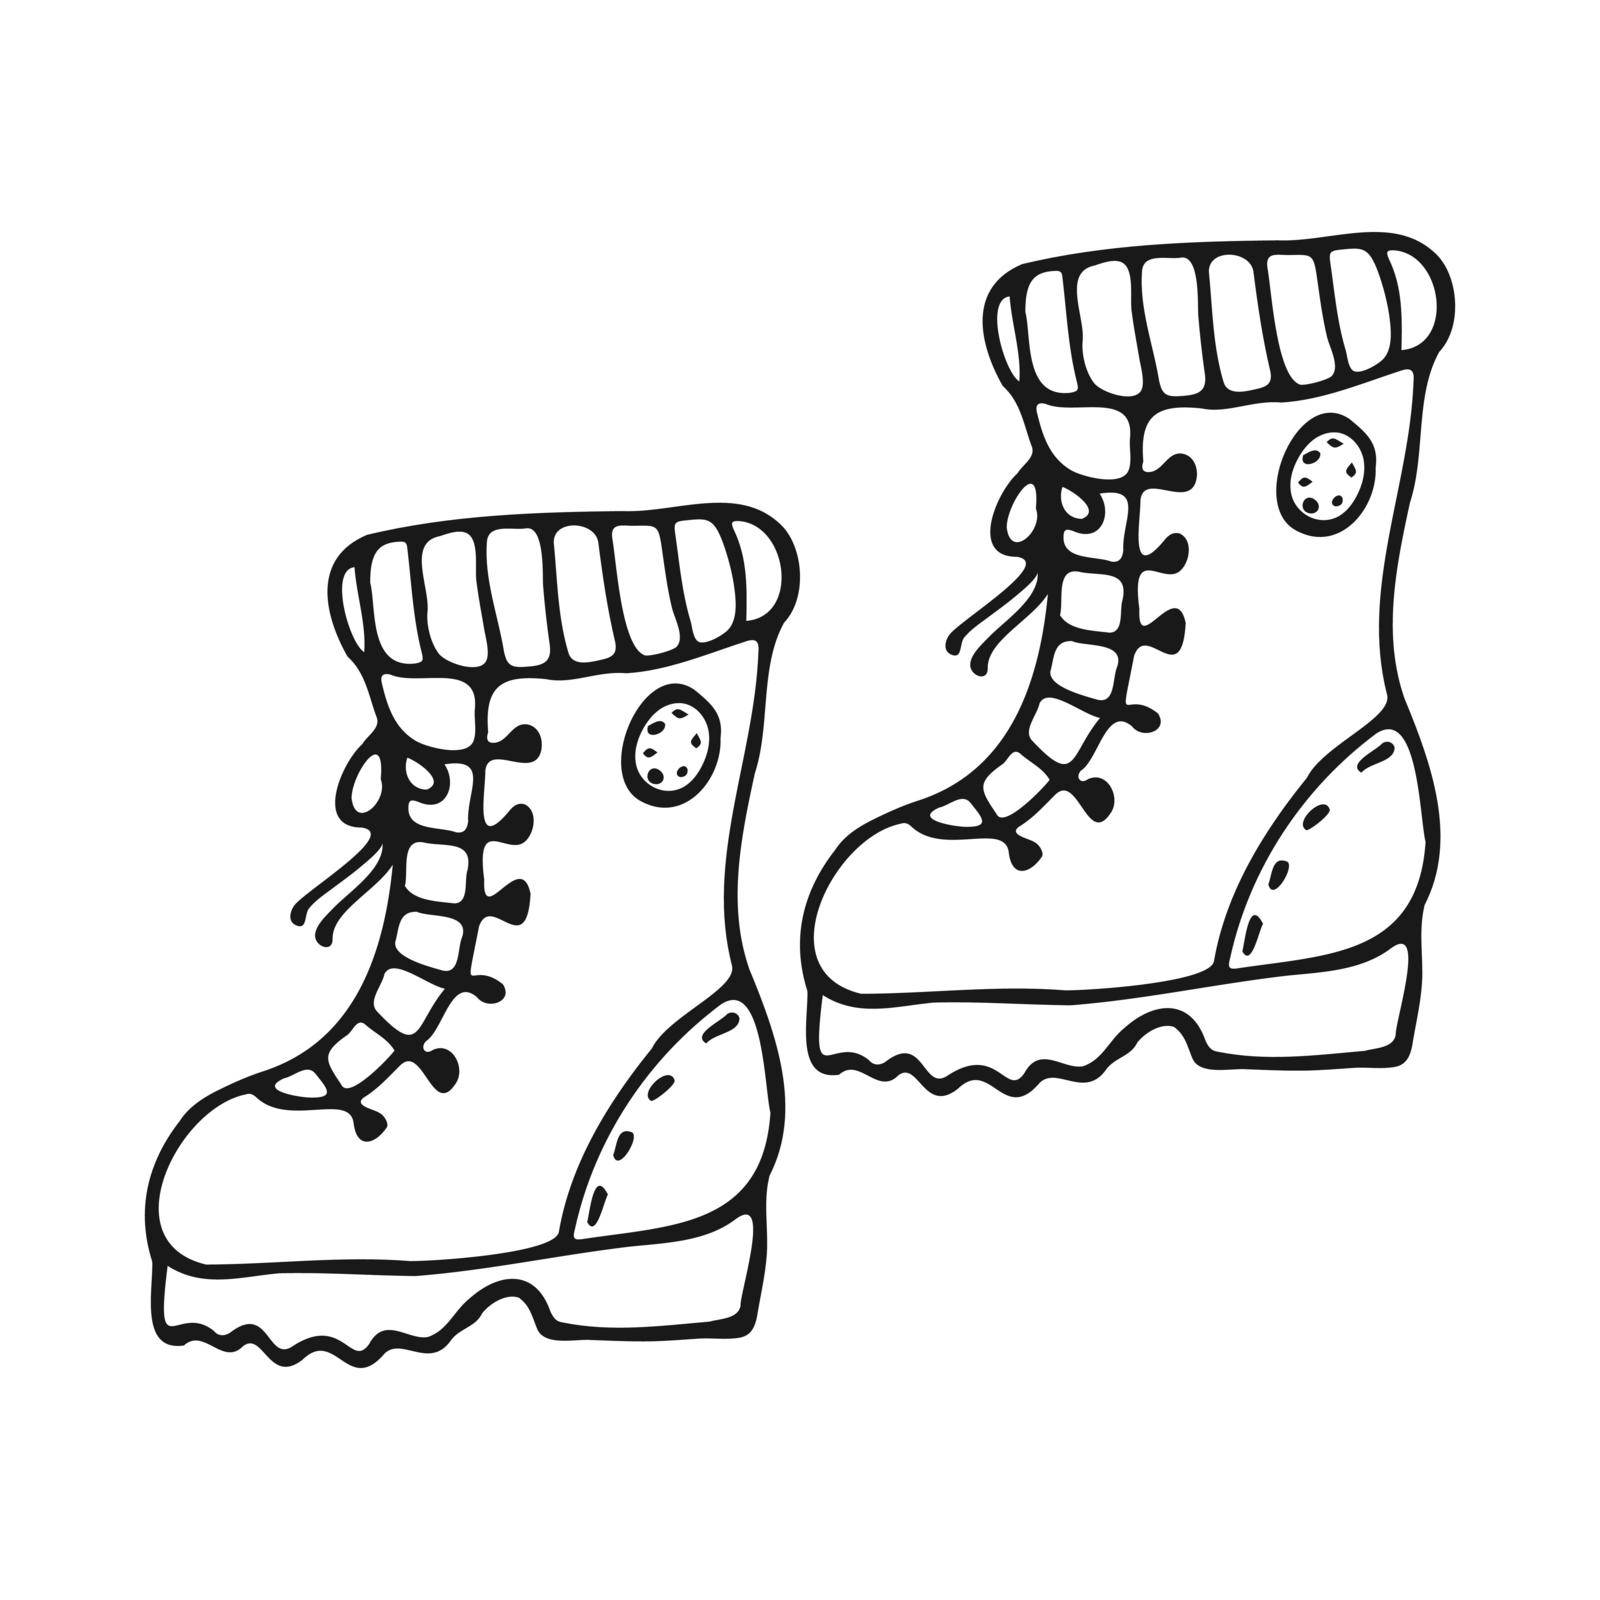 A pair of doodle-style hiking boots. by Mallva